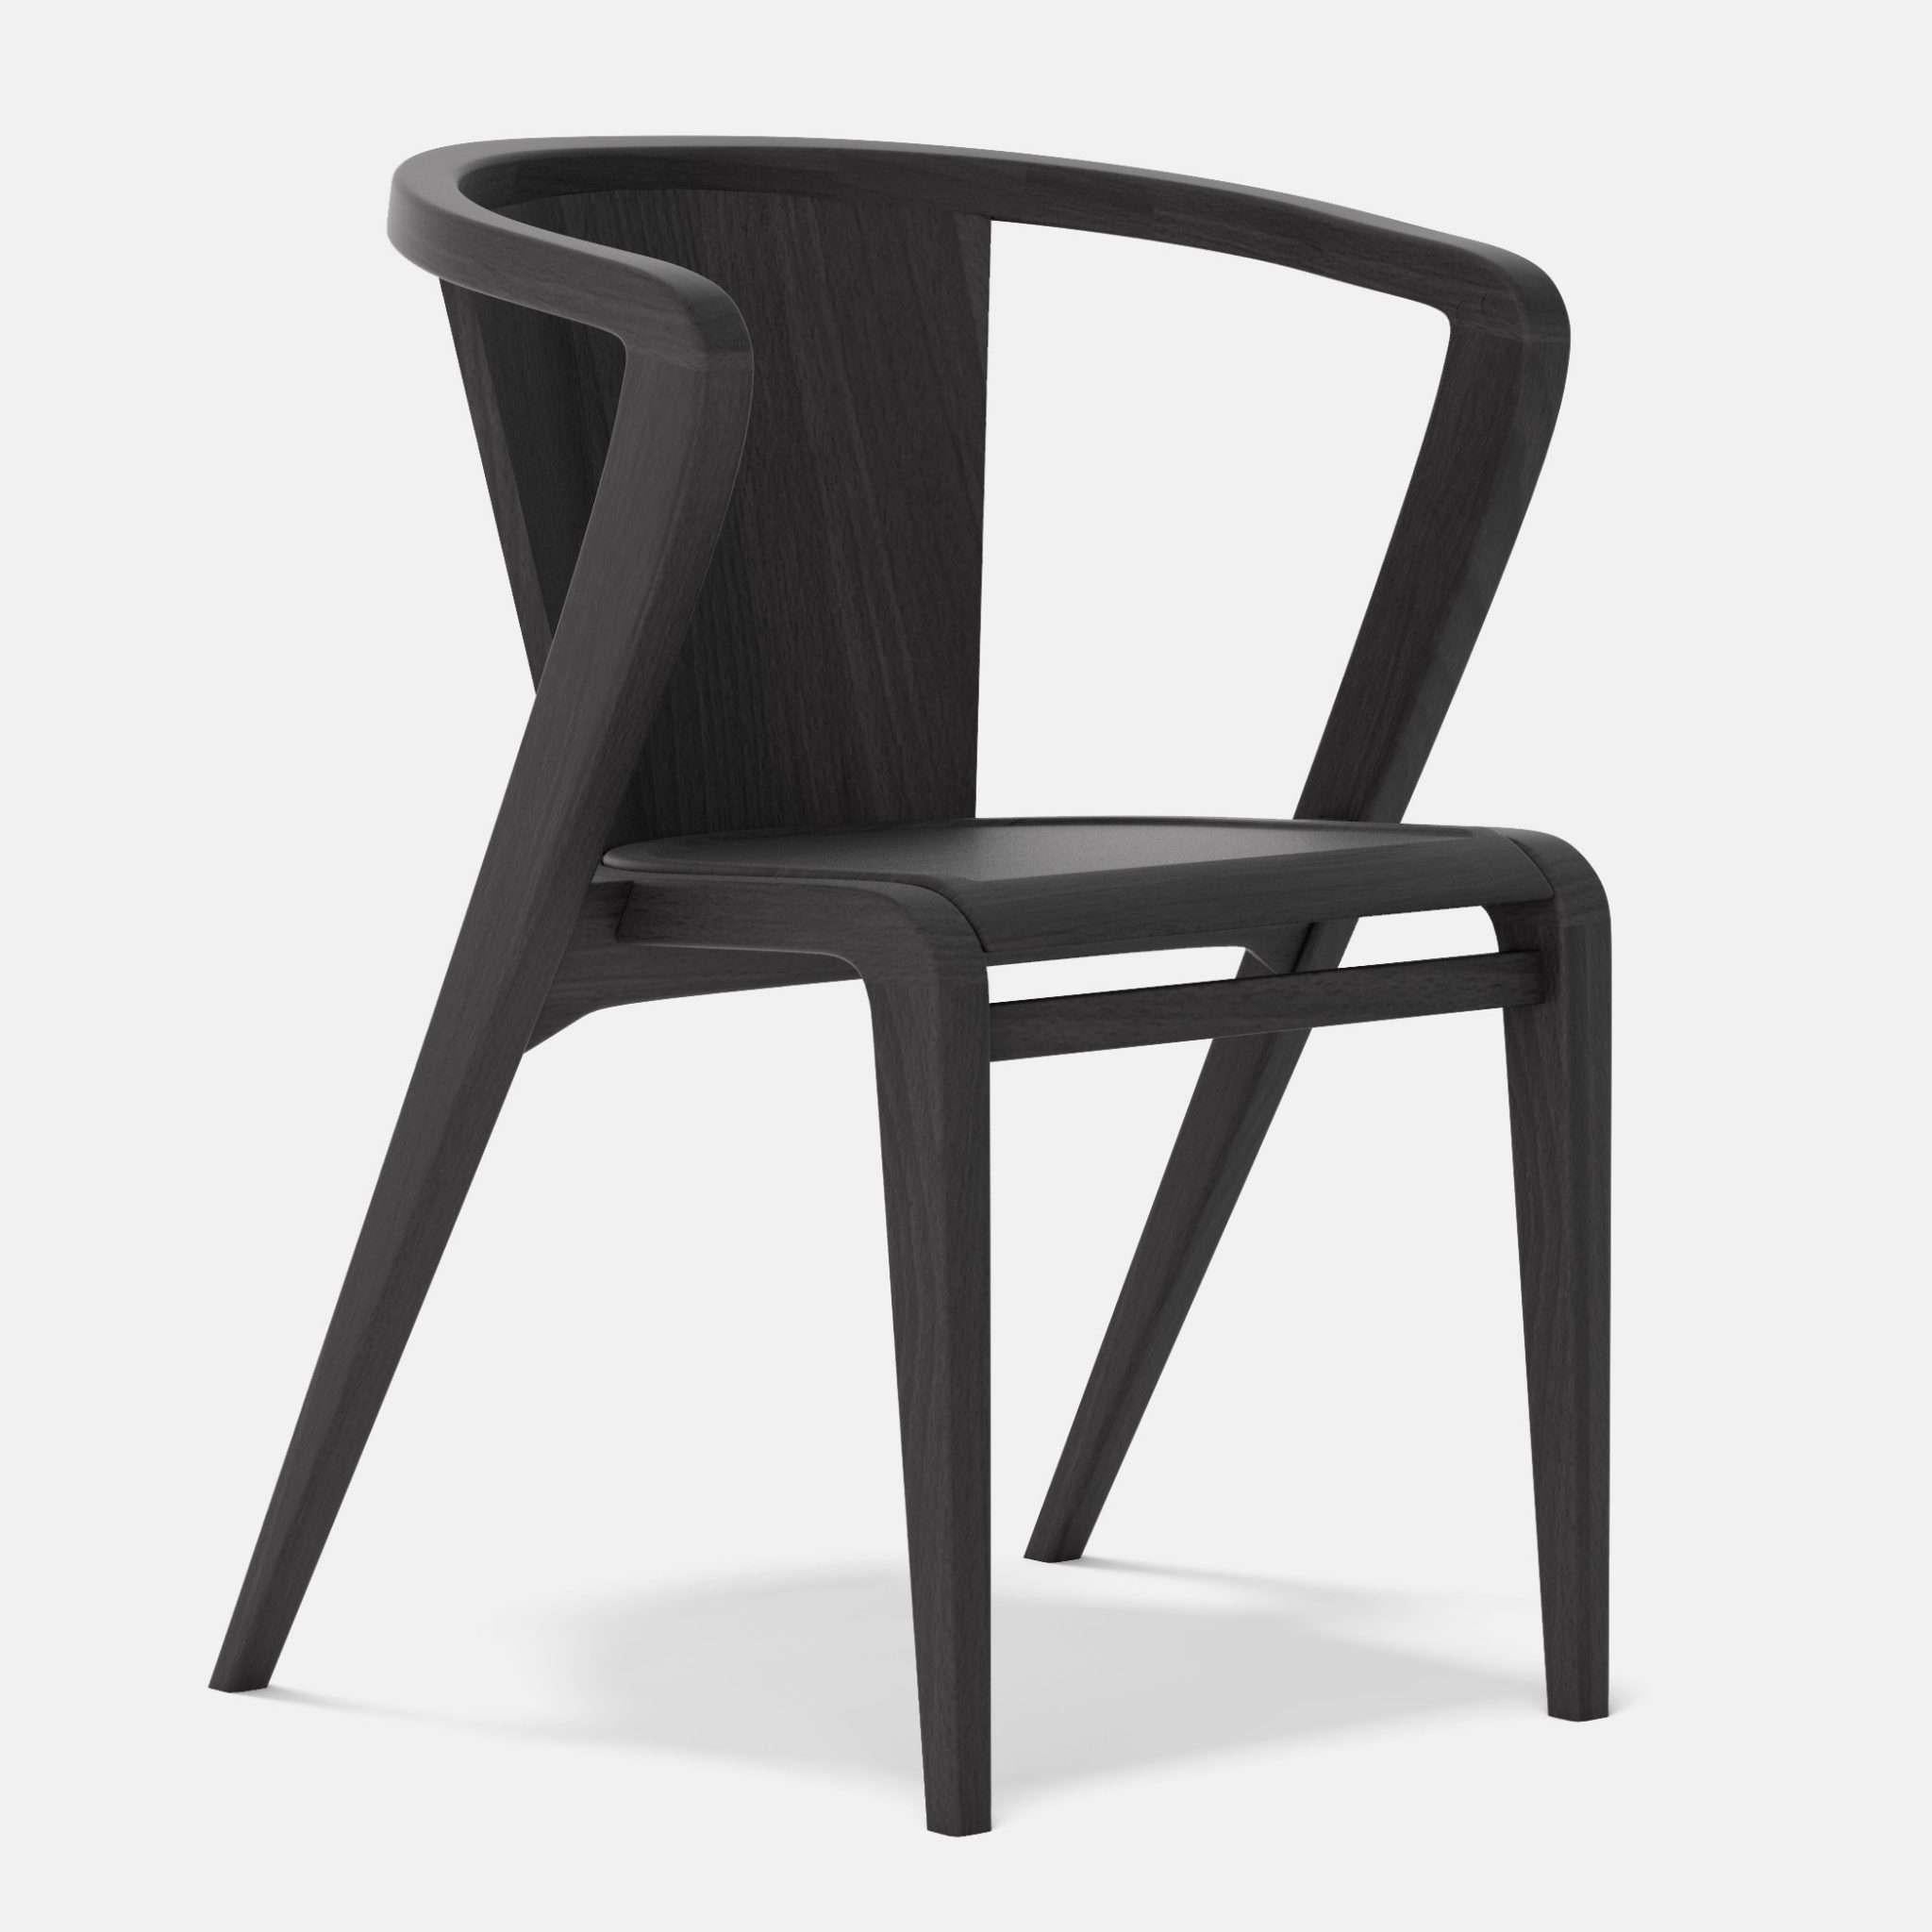 Portuguese roots chair in black pastel ashwood by Alexandre Caldas
Dimensions: W 40 x D 39 x H 73 cm
Materials: Ashwood painted black pastel

Portuguese roots chair, was inspired by its original model from 1950, created by Gonçalo Rodrigues dos